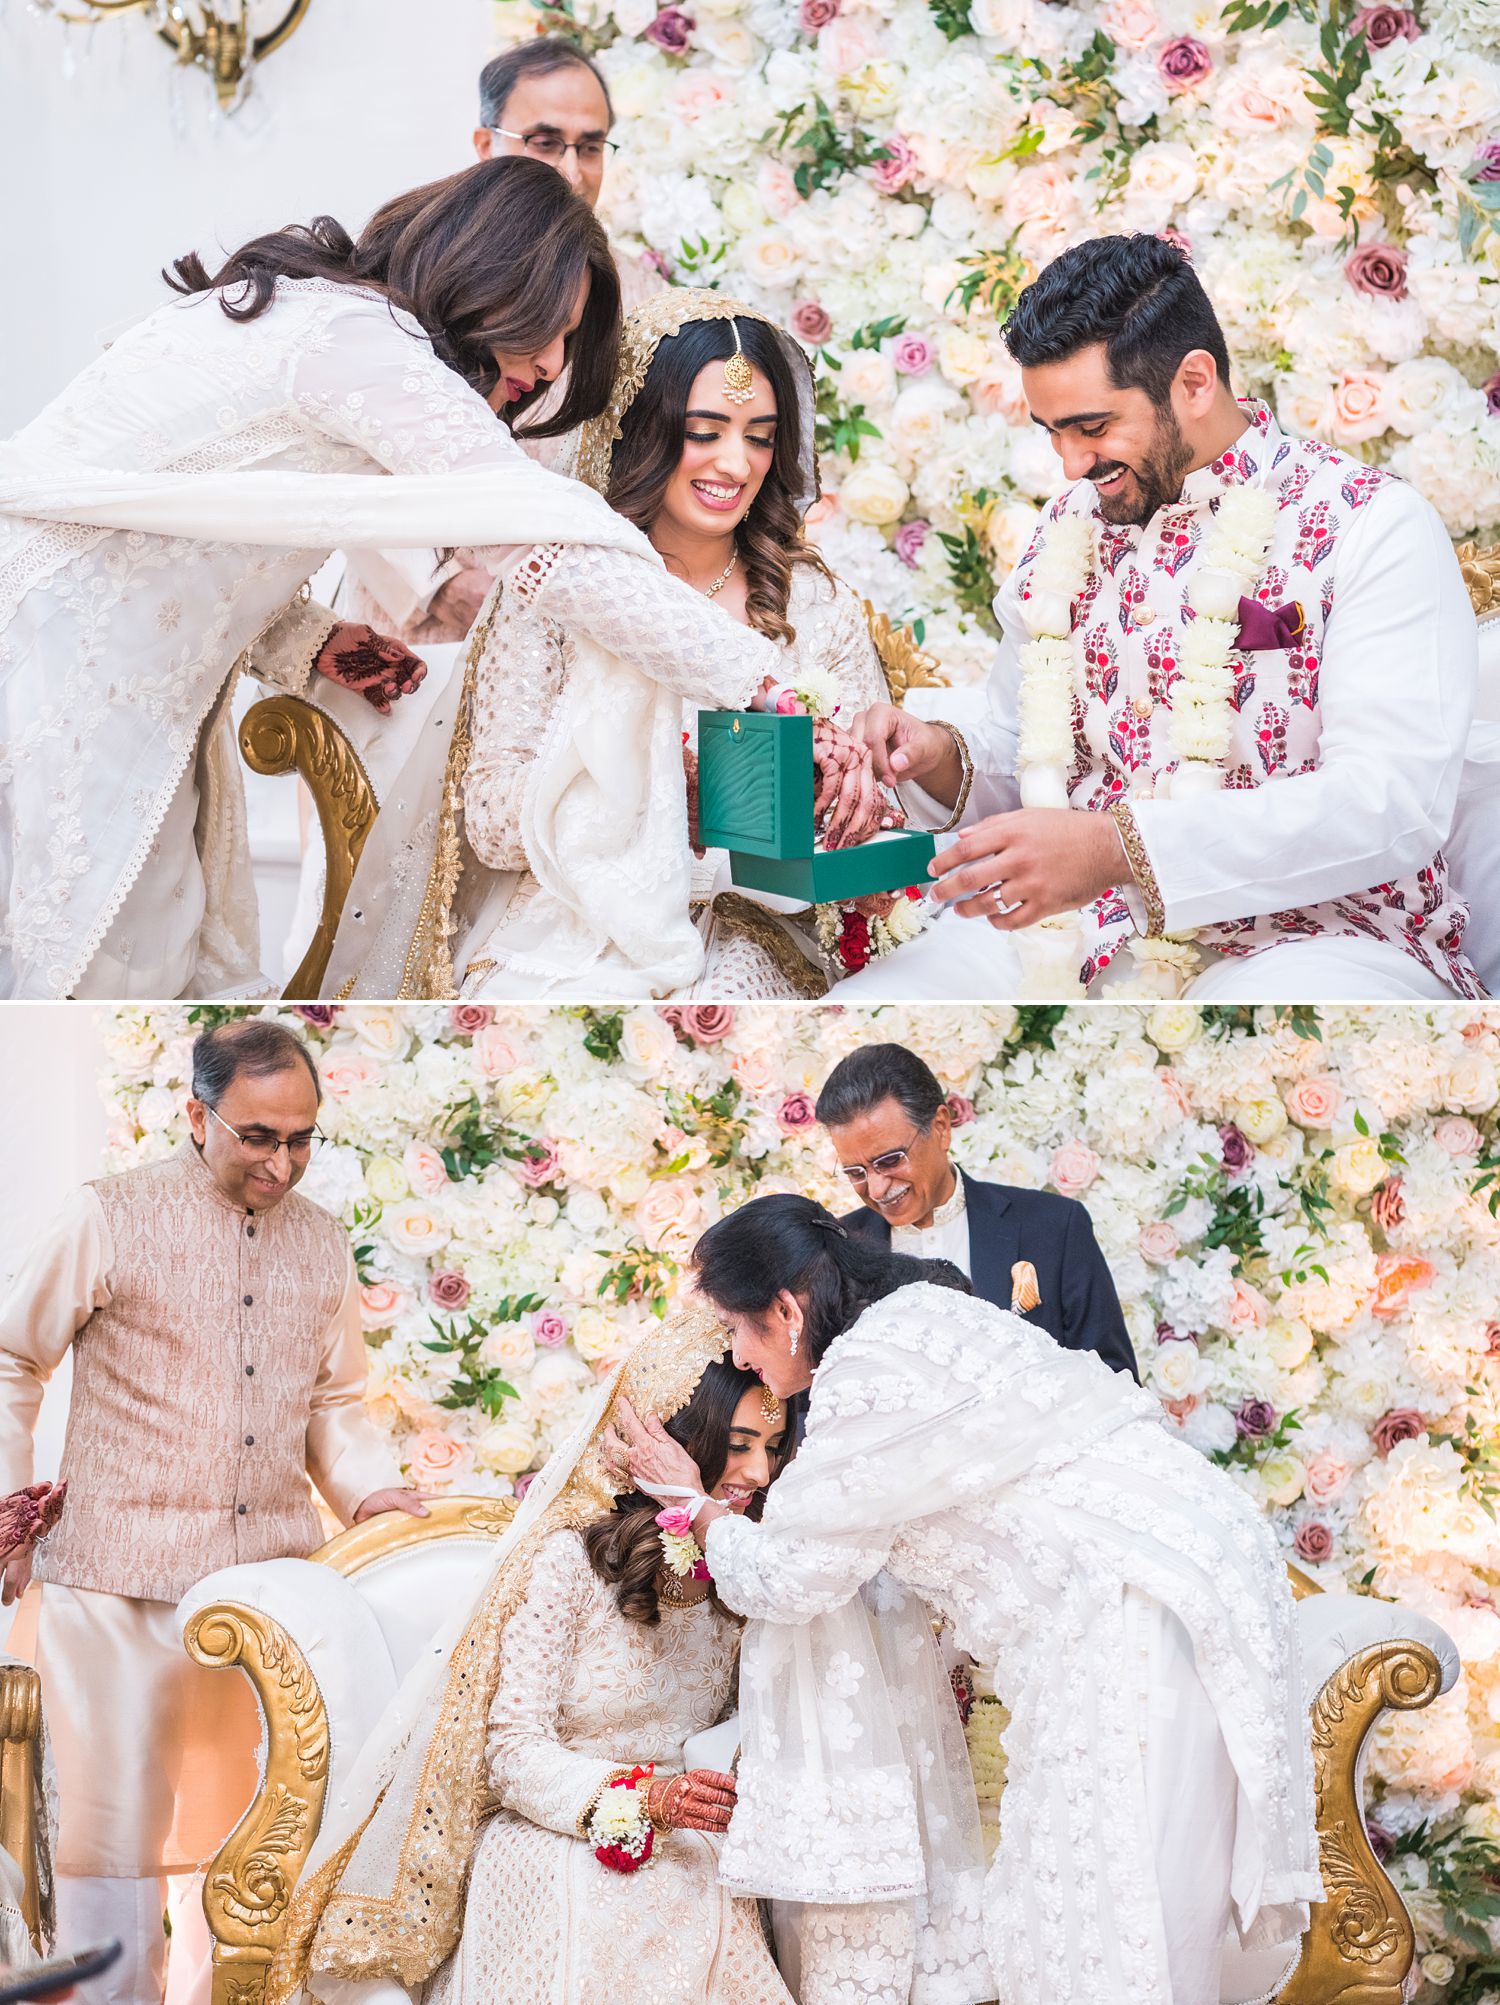 Candid nikah ceremony moments at Hilton Chicago photographed by Maha Studios